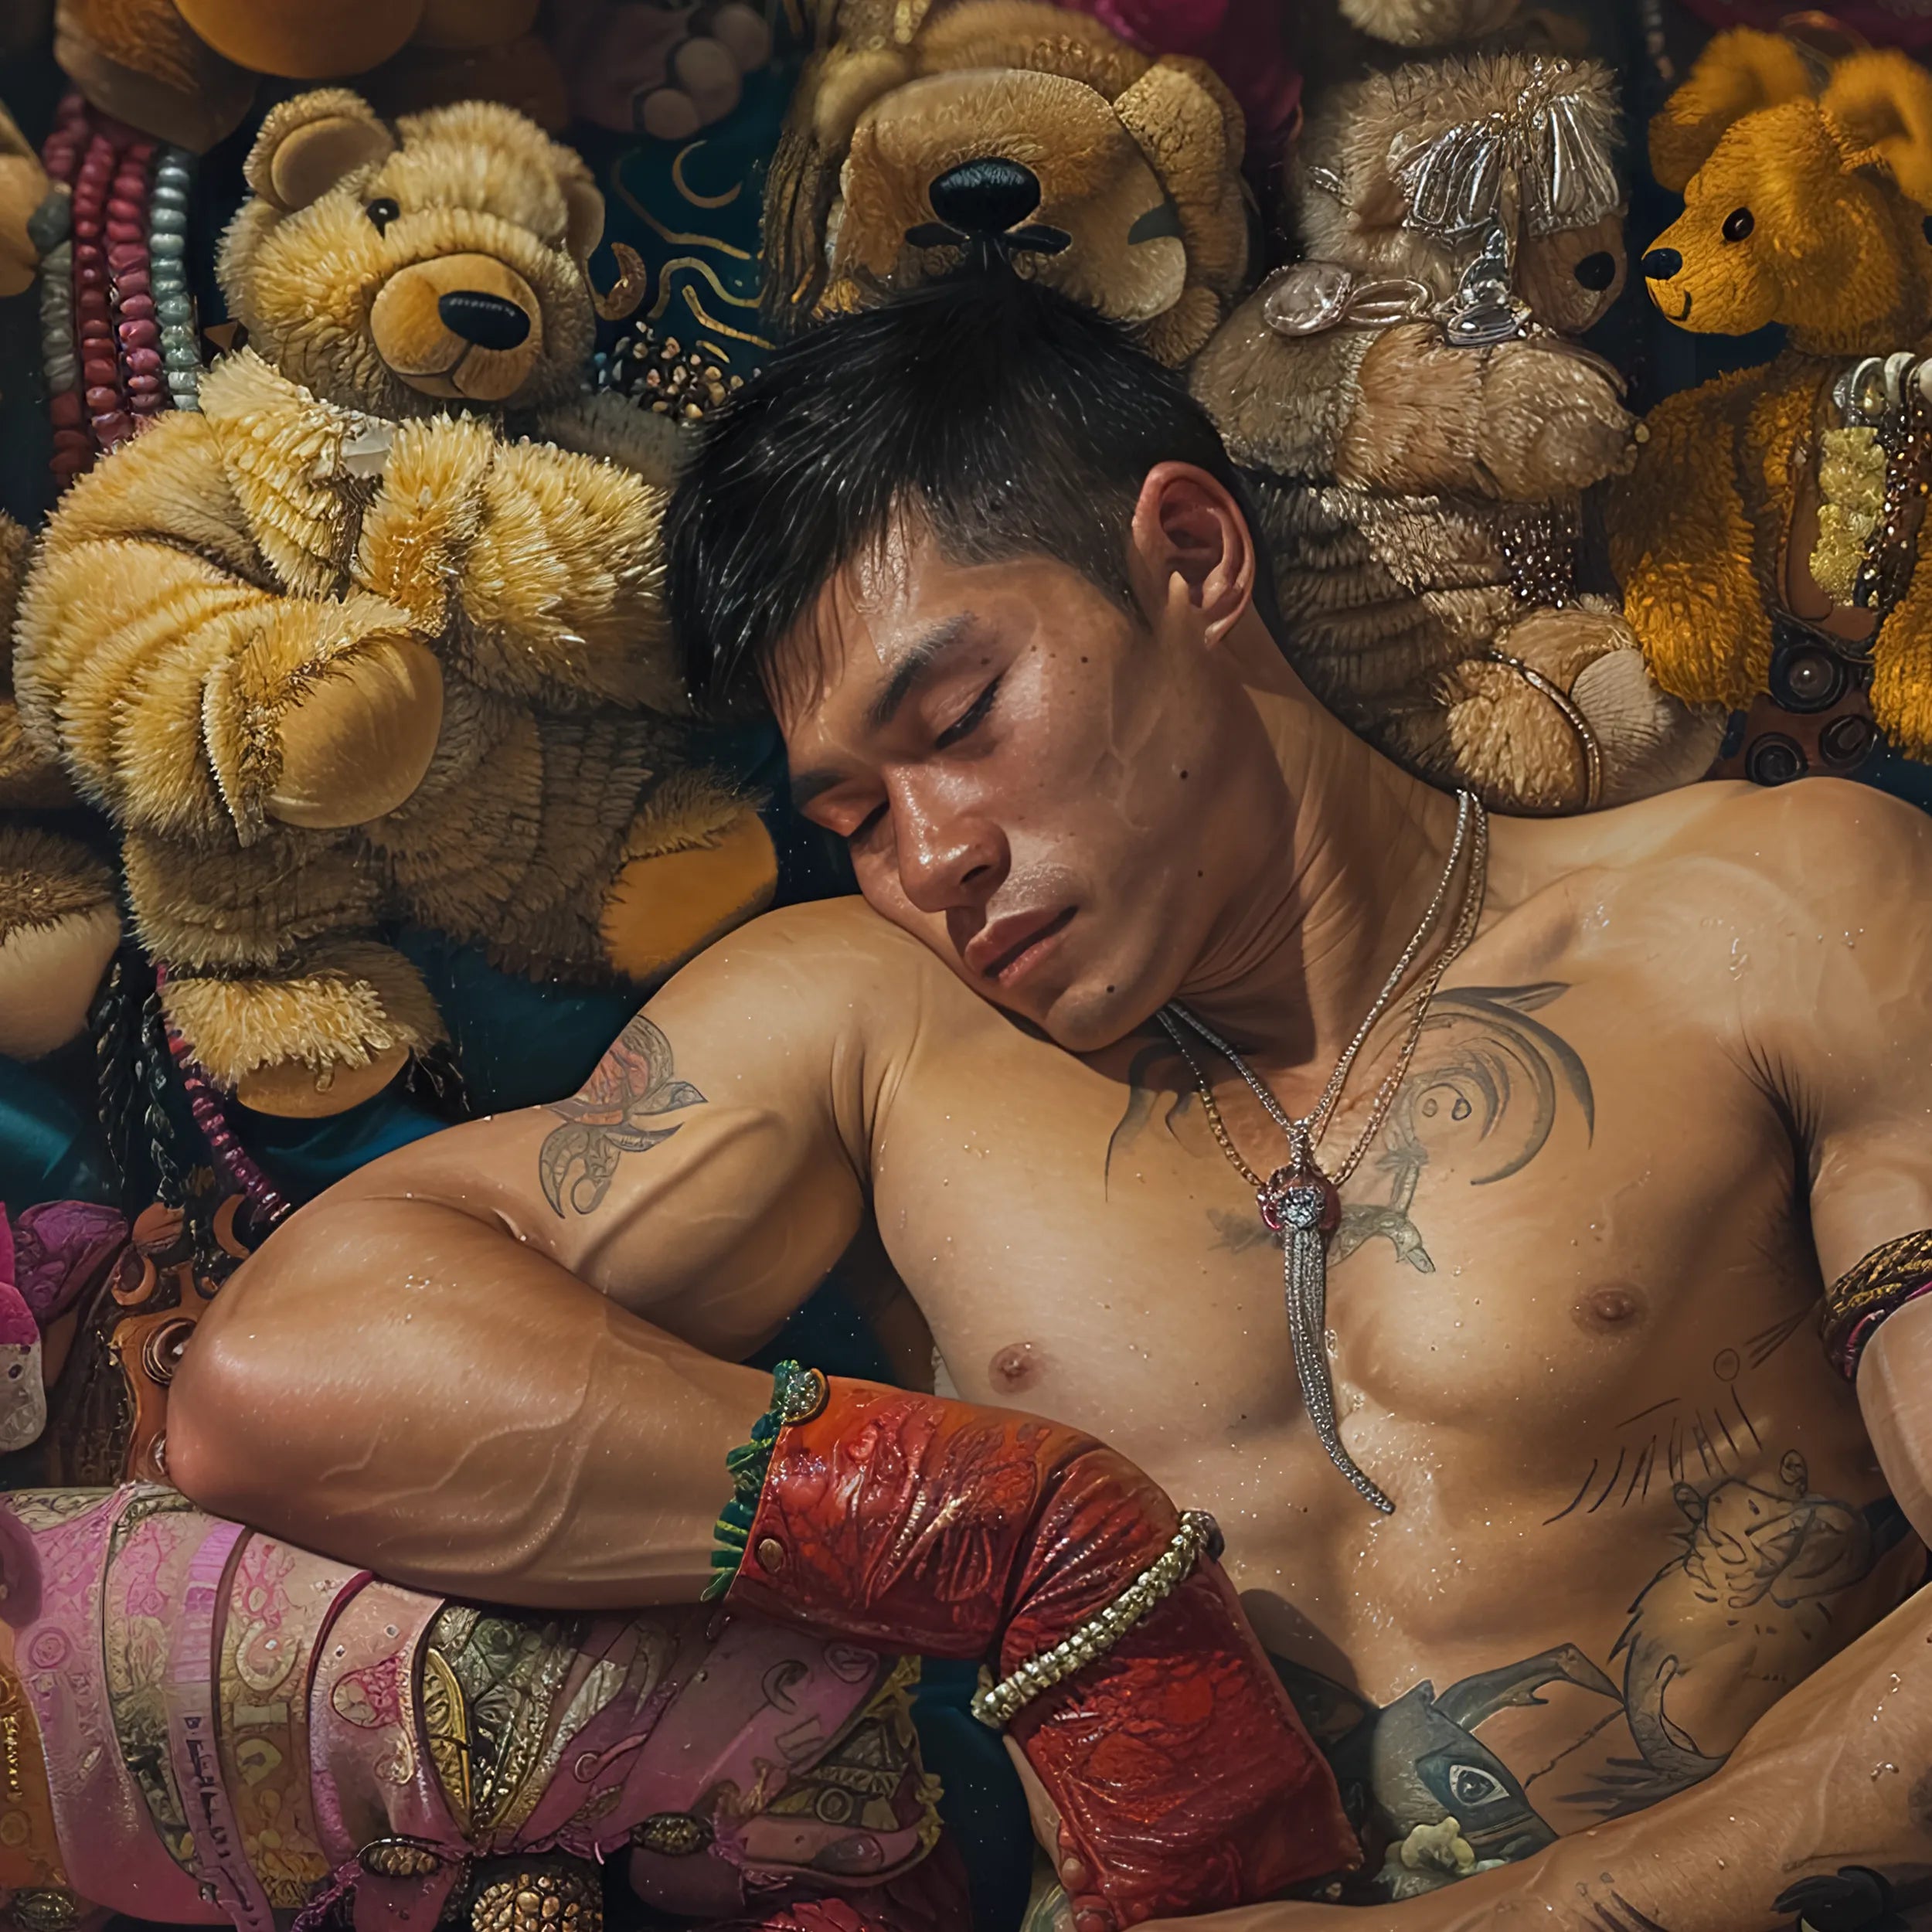 Tuckered Out - Gaysian Lowbrow Homoerotic Queerart Print - Posters Prints & Visual Artwork - Aesthetic Art